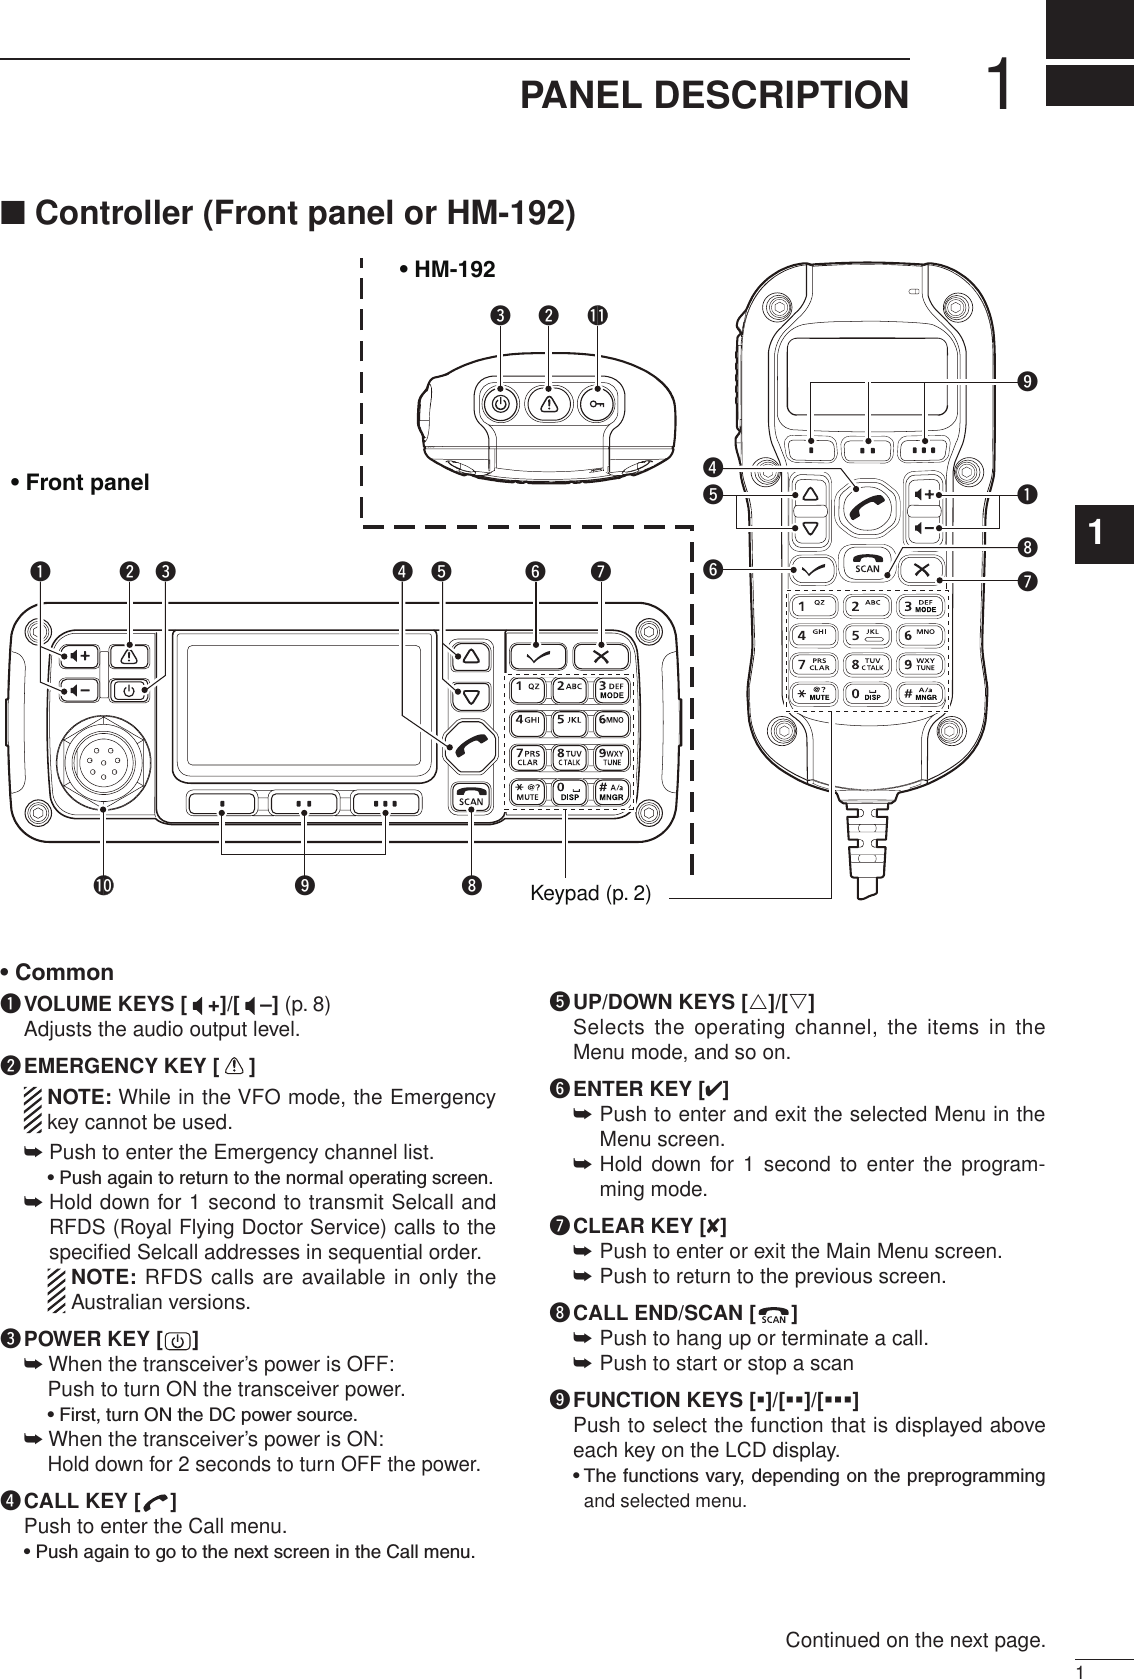 11PANEL DESCRIPTION2001 NEW1234567891011121314151617Quick Referenceq VOLUME KEYS [ +]/[ –] (p. 8)Adjusts the audio output level.w EMERGENCY KEY [ ]   NOTE: While in the VFO mode, the Emergency key cannot be used.➥  Push to enter the Emergency channel list.    •  Push again to return to the normal operating screen.➥  Hold down for 1 second to transmit Selcall and RFDS (Royal Flying Doctor Service) calls to the speciﬁed Selcall addresses in sequential order.    NOTE: RFDS calls are available in only the Australian versions.e POWER KEY [ ] ➥  When the transceiver’s power is OFF:    Push to turn ON the transceiver power.    • First, turn ON the DC power source. ➥  When the transceiver’s power is ON:  Hold down for 2 seconds to turn OFF the power.r CALL KEY [ ]Push to enter the Call menu.  •  Push again to go to the next screen in the Call menu.t UP/DOWN KEYS [r]/[s]Selects the  operating channel,  the items in the Menu mode, and so on.y ENTER KEY [4] Push to enter and exit the selected Menu in the  ➥Menu screen. Hold  down for  1  second  to  enter  the  program- ➥ming mode.u CLEAR KEY [8] Push to enter or exit the Main Menu screen. ➥ Push to return to the previous screen.  ➥i CALL END/SCAN [ ] Push to hang up or terminate a call.  ➥Push to start or stop a scan ➥o FUNCTION KEYS [§]/[§§]/[§§§]   Push to select the function that is displayed above each key on the LCD display.   •  The functions vary, depending on the preprogramming and selected menu.q ww !1eerio!0tyuKeypad (p. 2)qouytri• HM-192• Front panel■ Controller (Front panel or HM-192)•CommonContinued on the next page.